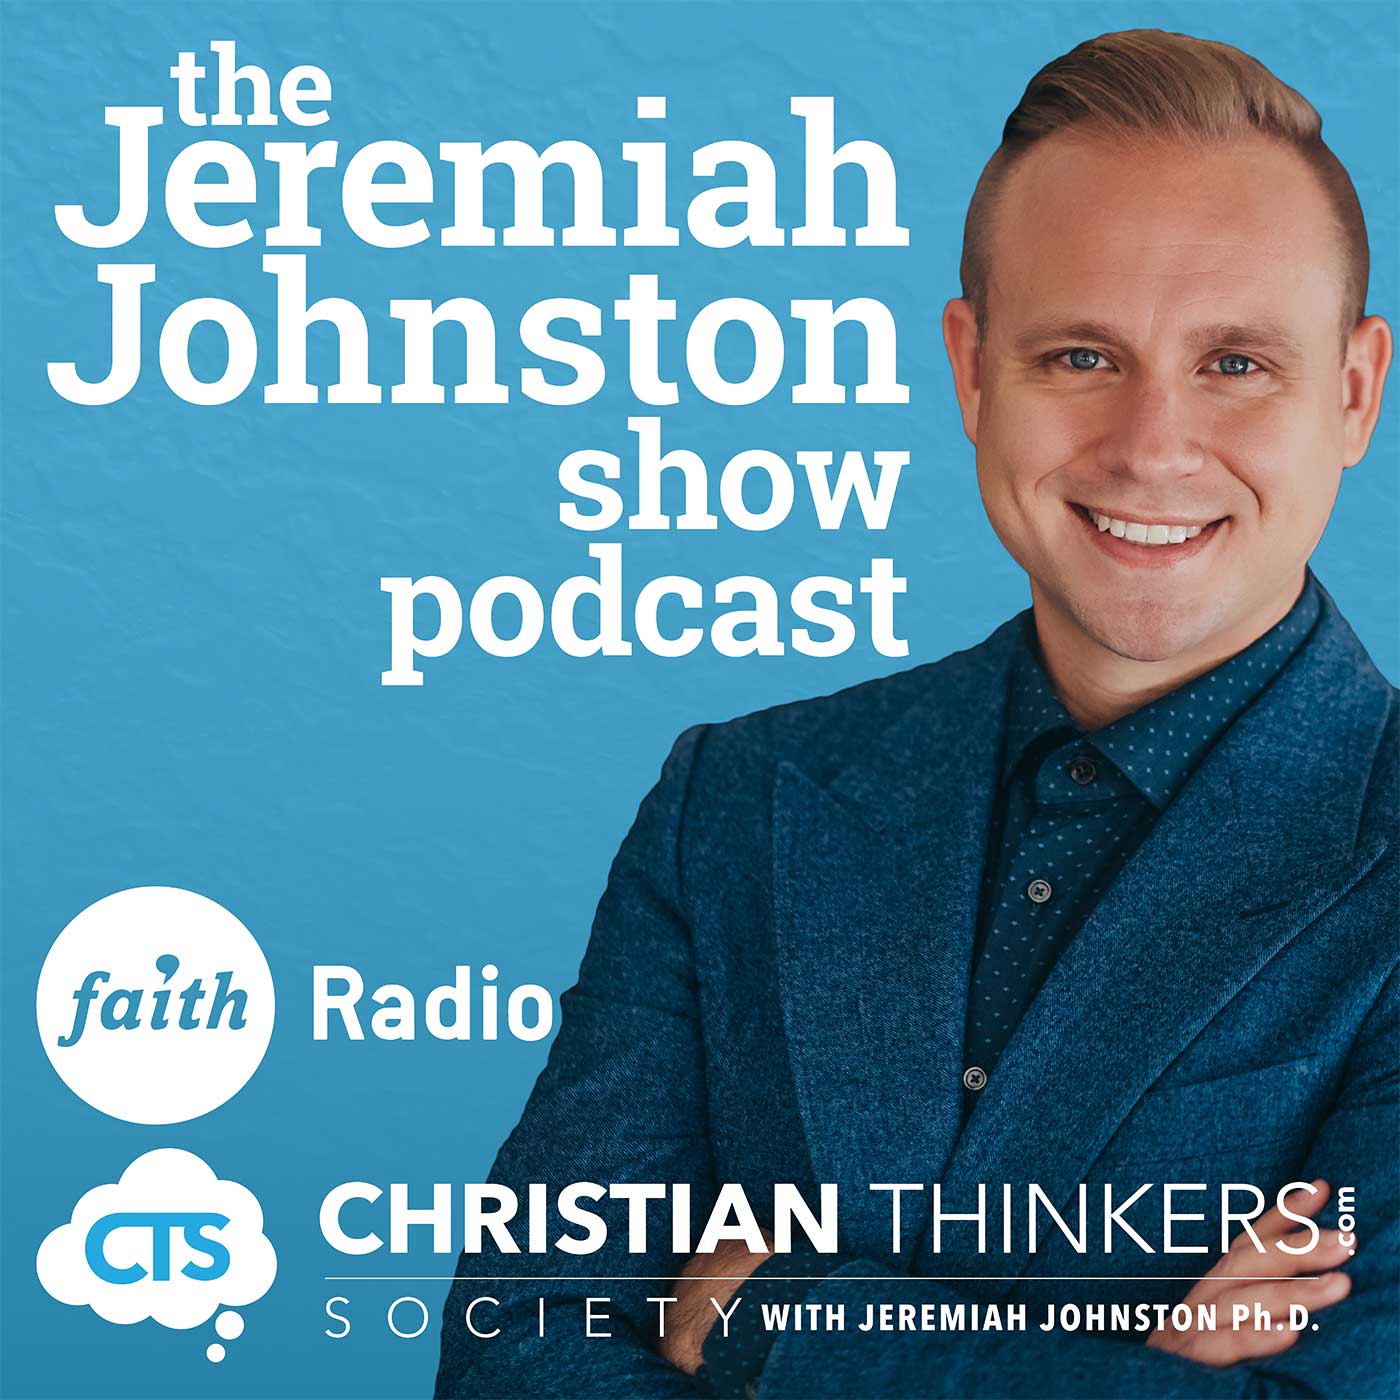 Listen to the Jeremiah Johnston Show Podcast